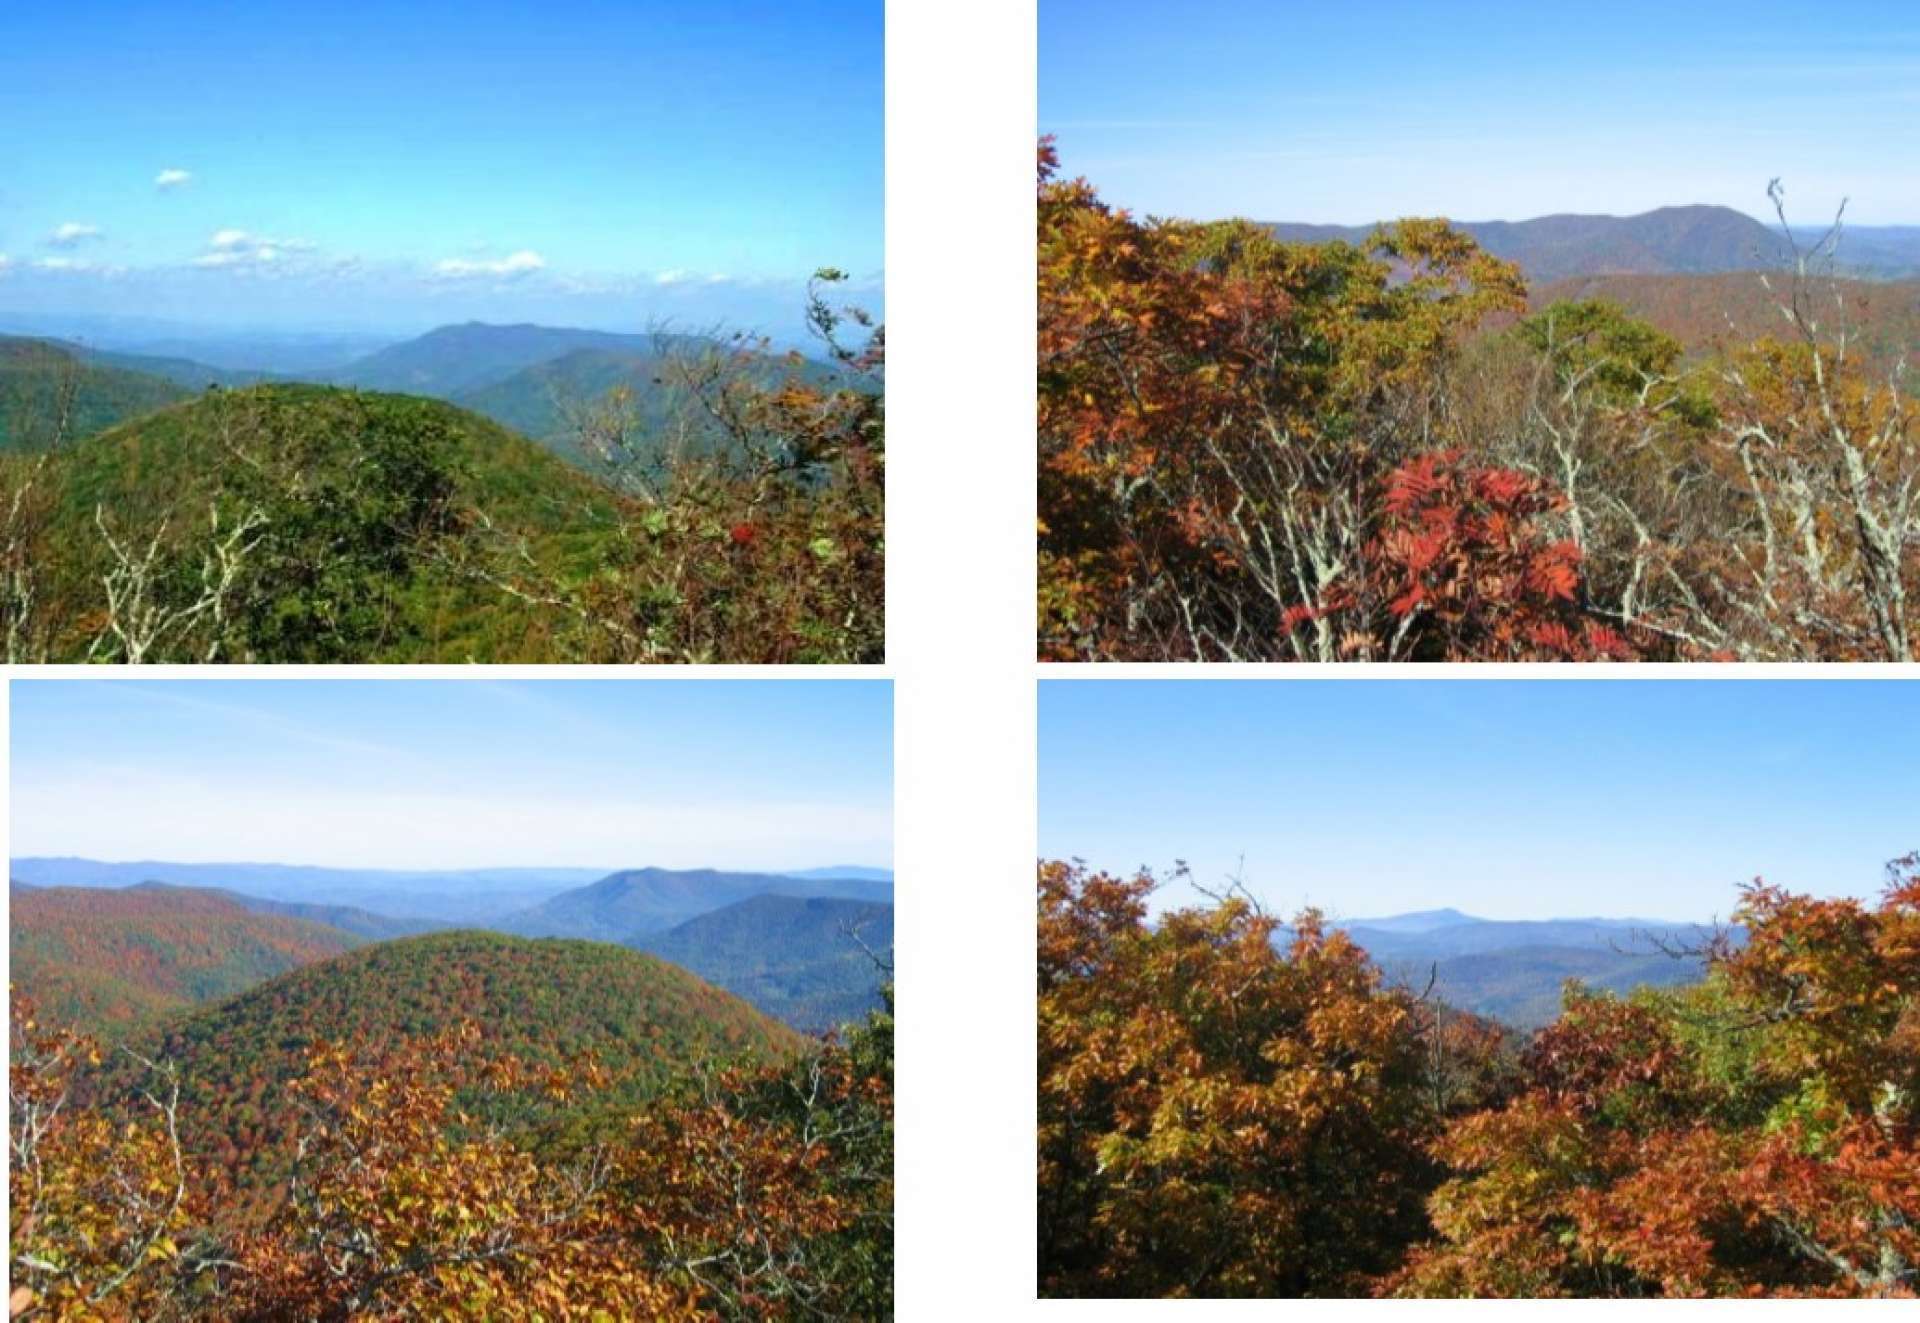 Watch the mountains change colors during all four seasons in the North Carolina High Country. Simply breathtaking!